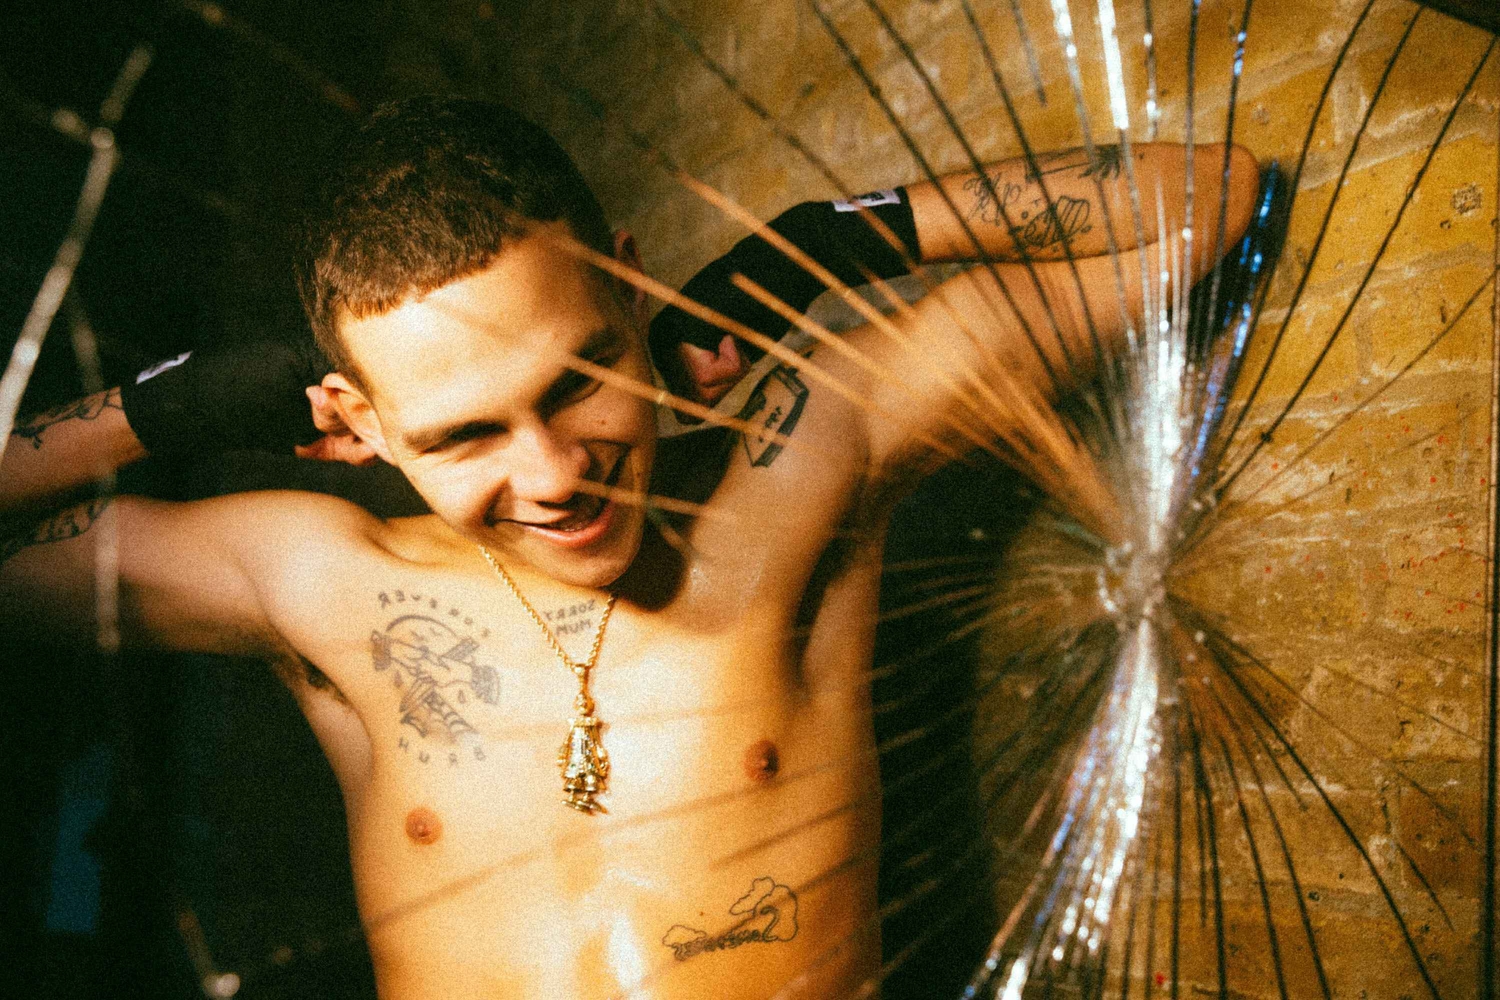 Listen to slowthai covering Portishead in the Live Lounge